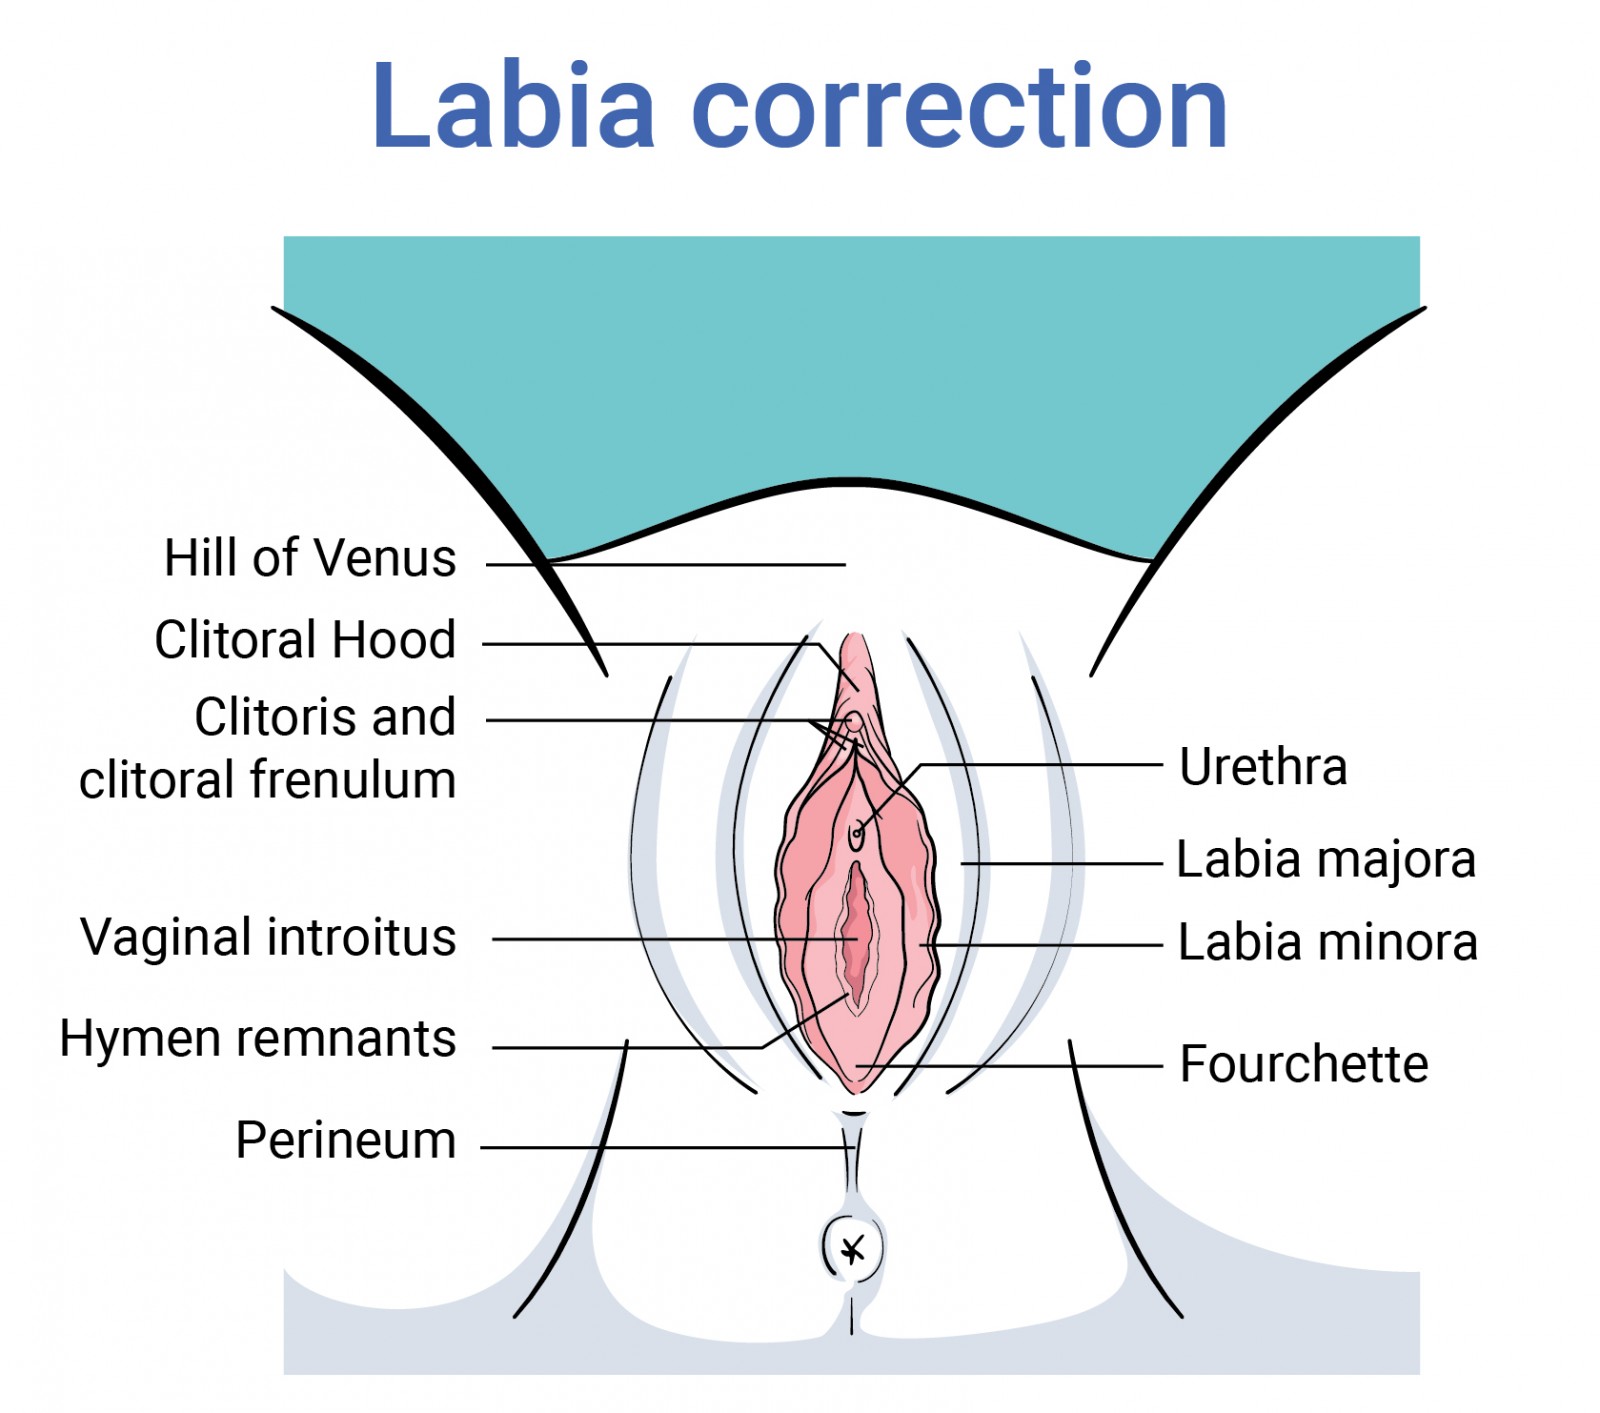 Body surgery labia correction before and after surgery in antwerp